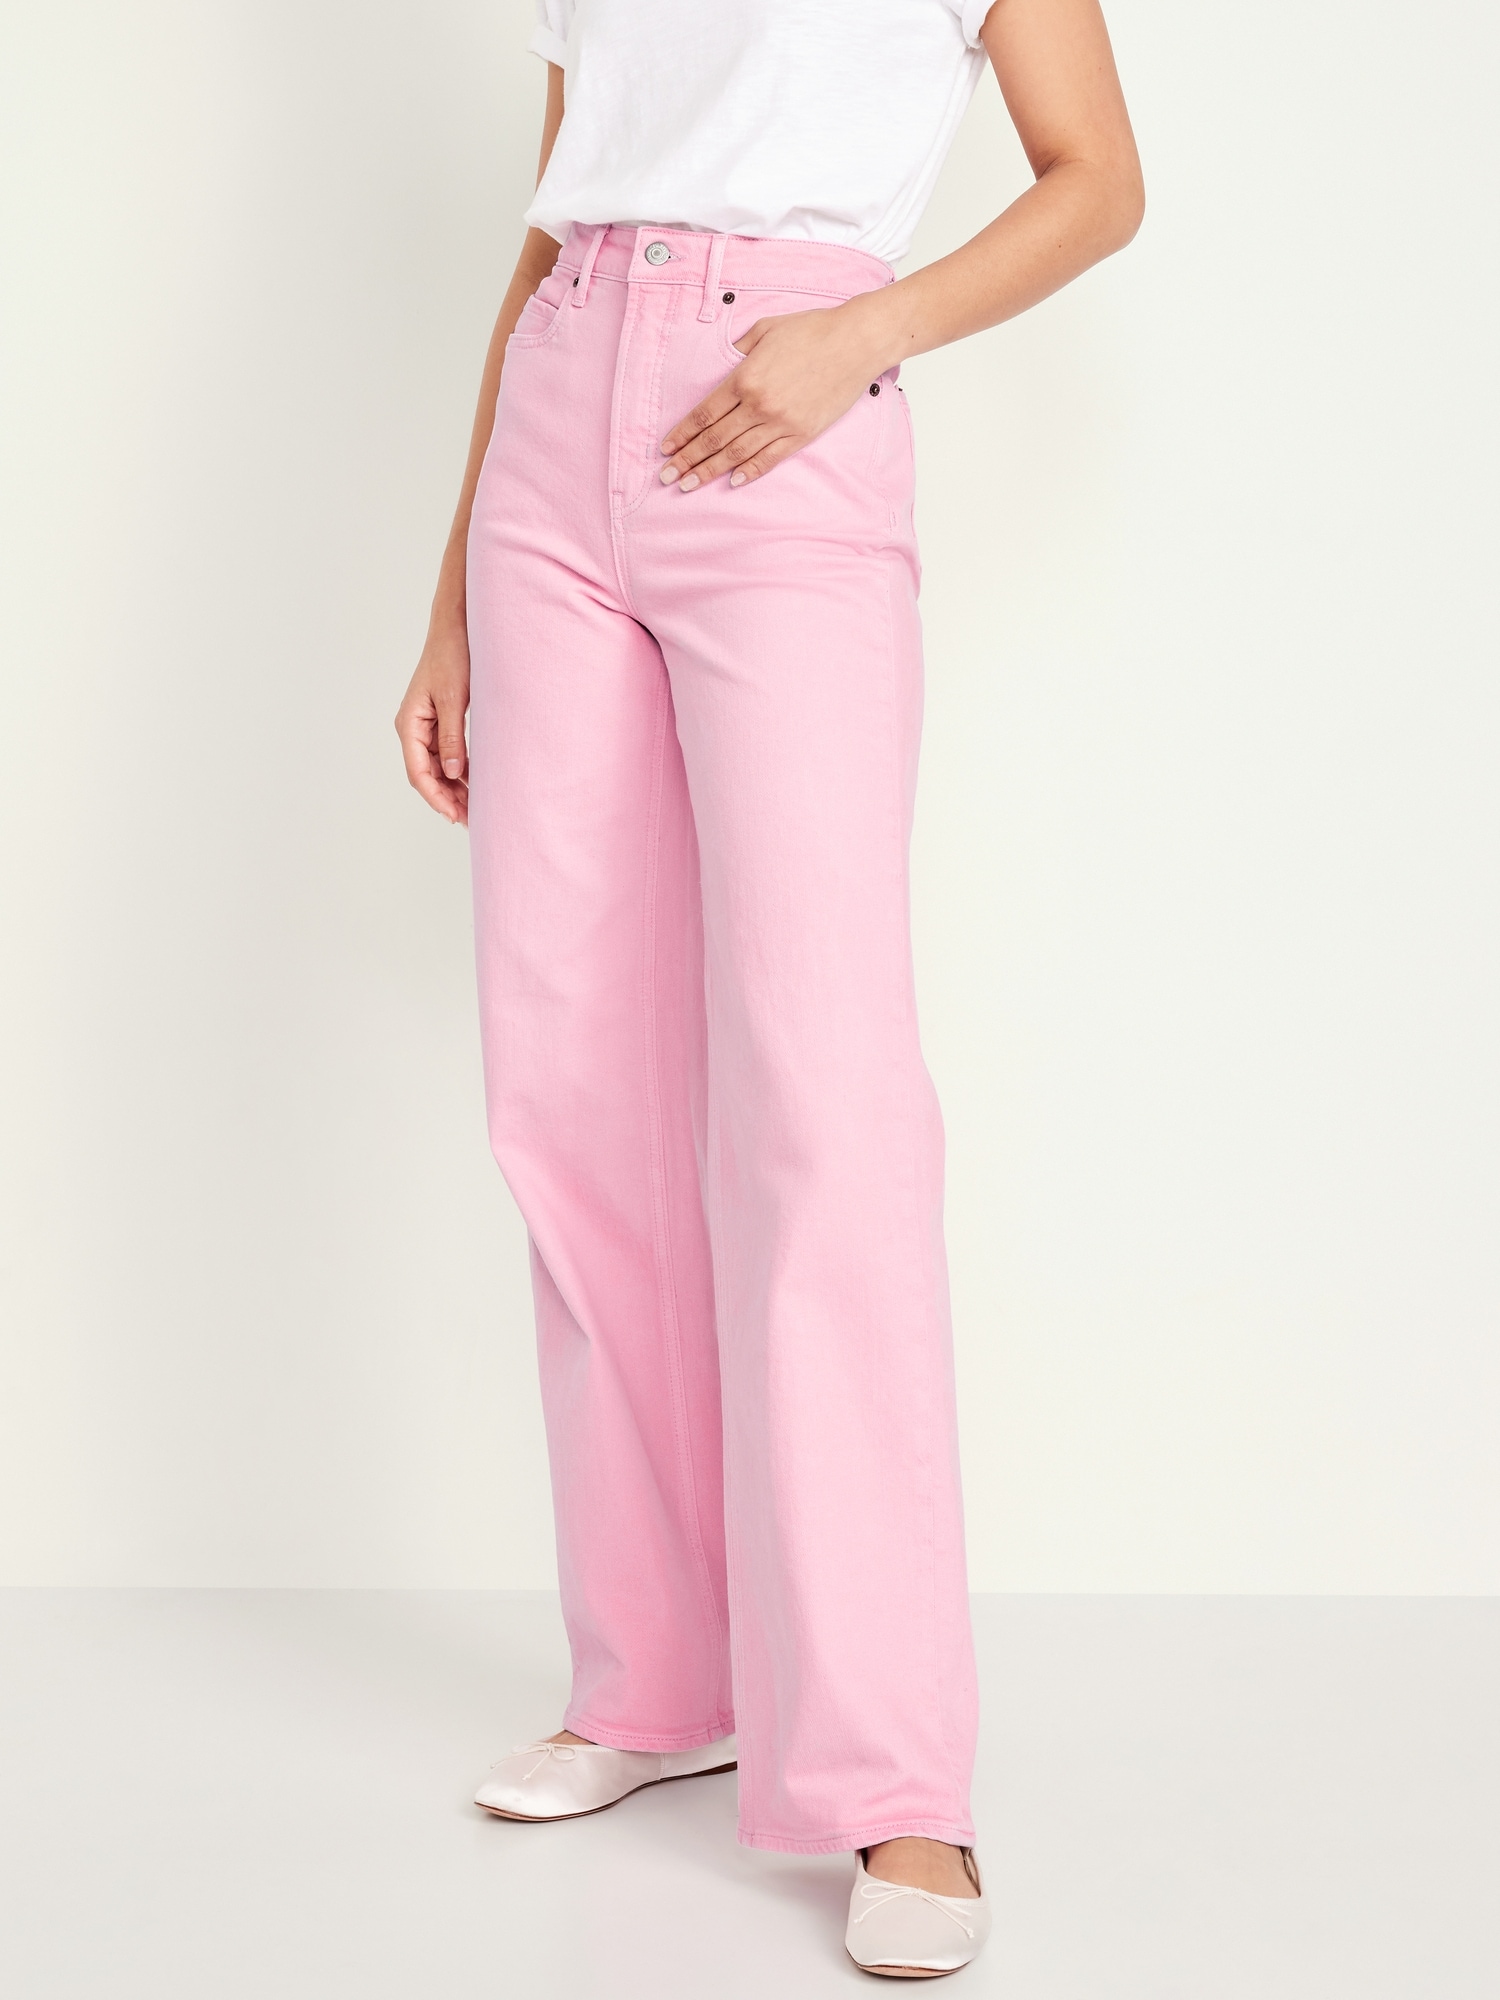 Summer Love Ripped Stretch Flare Jeans - Pink